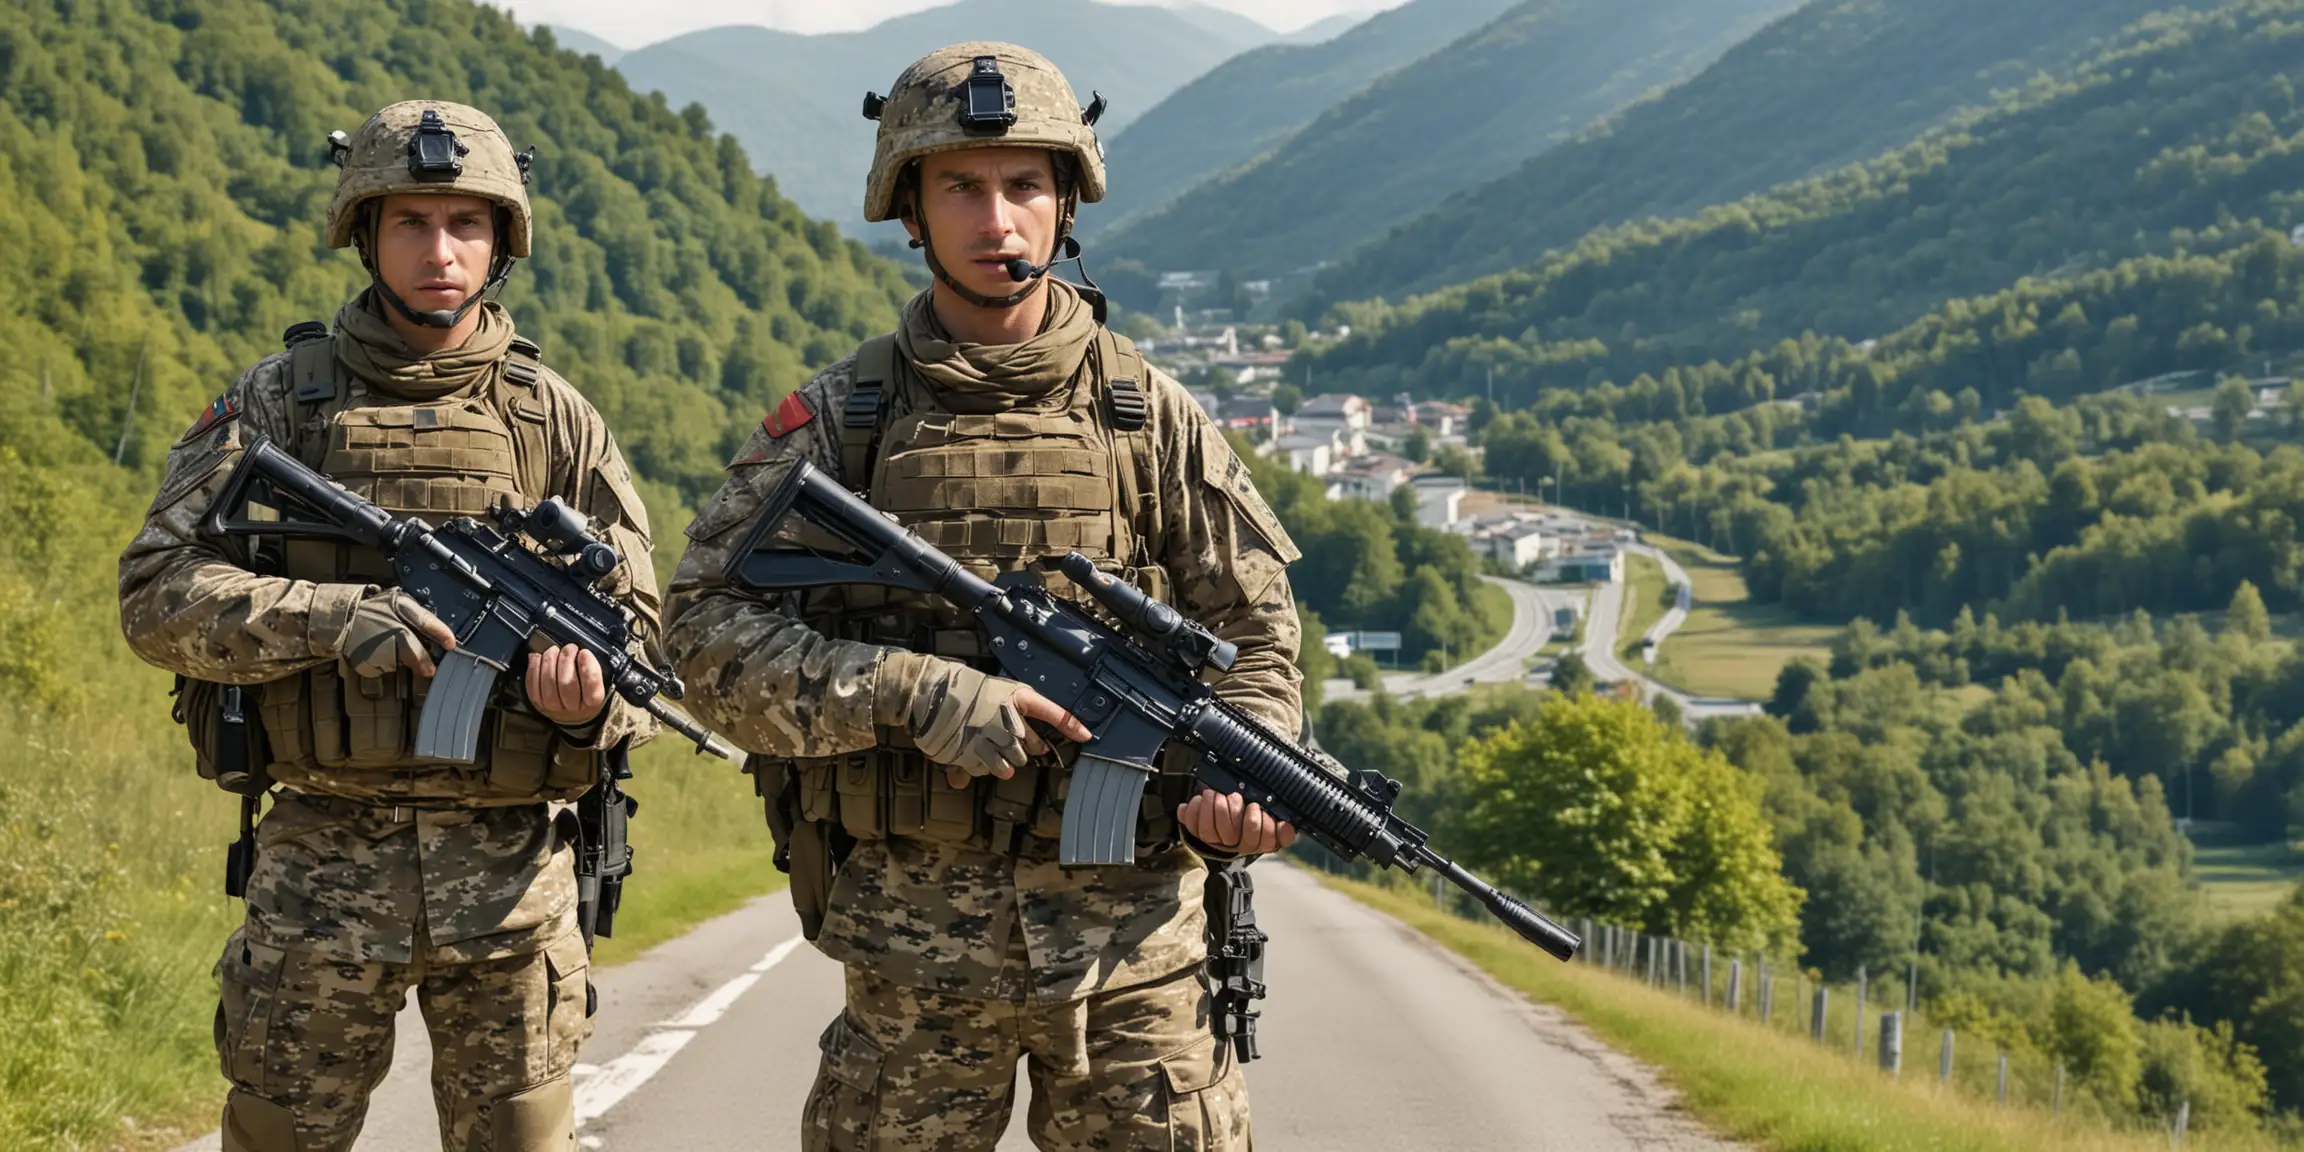 Two modern Liechtenstein soldiers with helmet wearing digital camouflage, carrying G36 rifles, standing at checkpoint, mountain road background